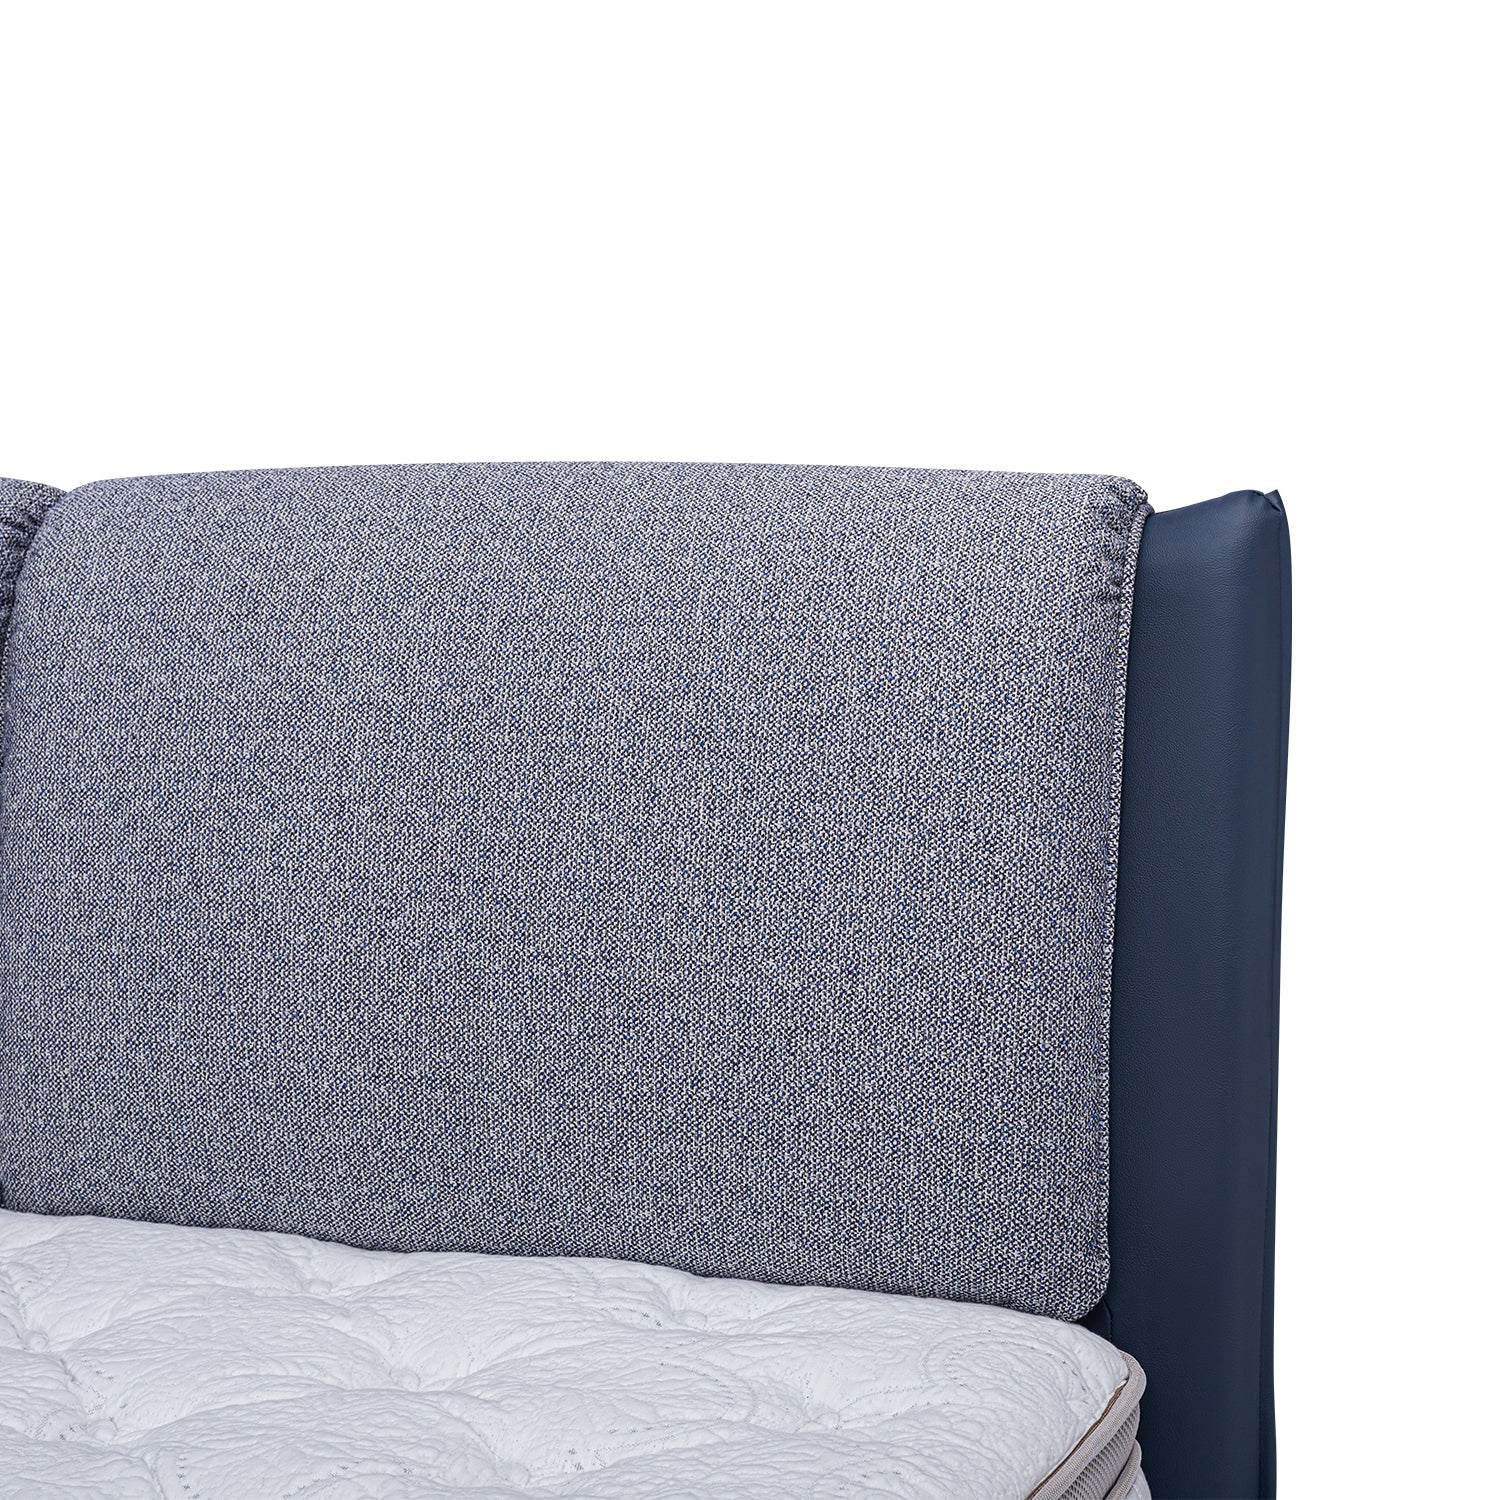 Close-up of DeRUCCI's Bed Frame BOC1 - 017 featuring a grey fabric headboard and navy blue side panel with a white quilted mattress